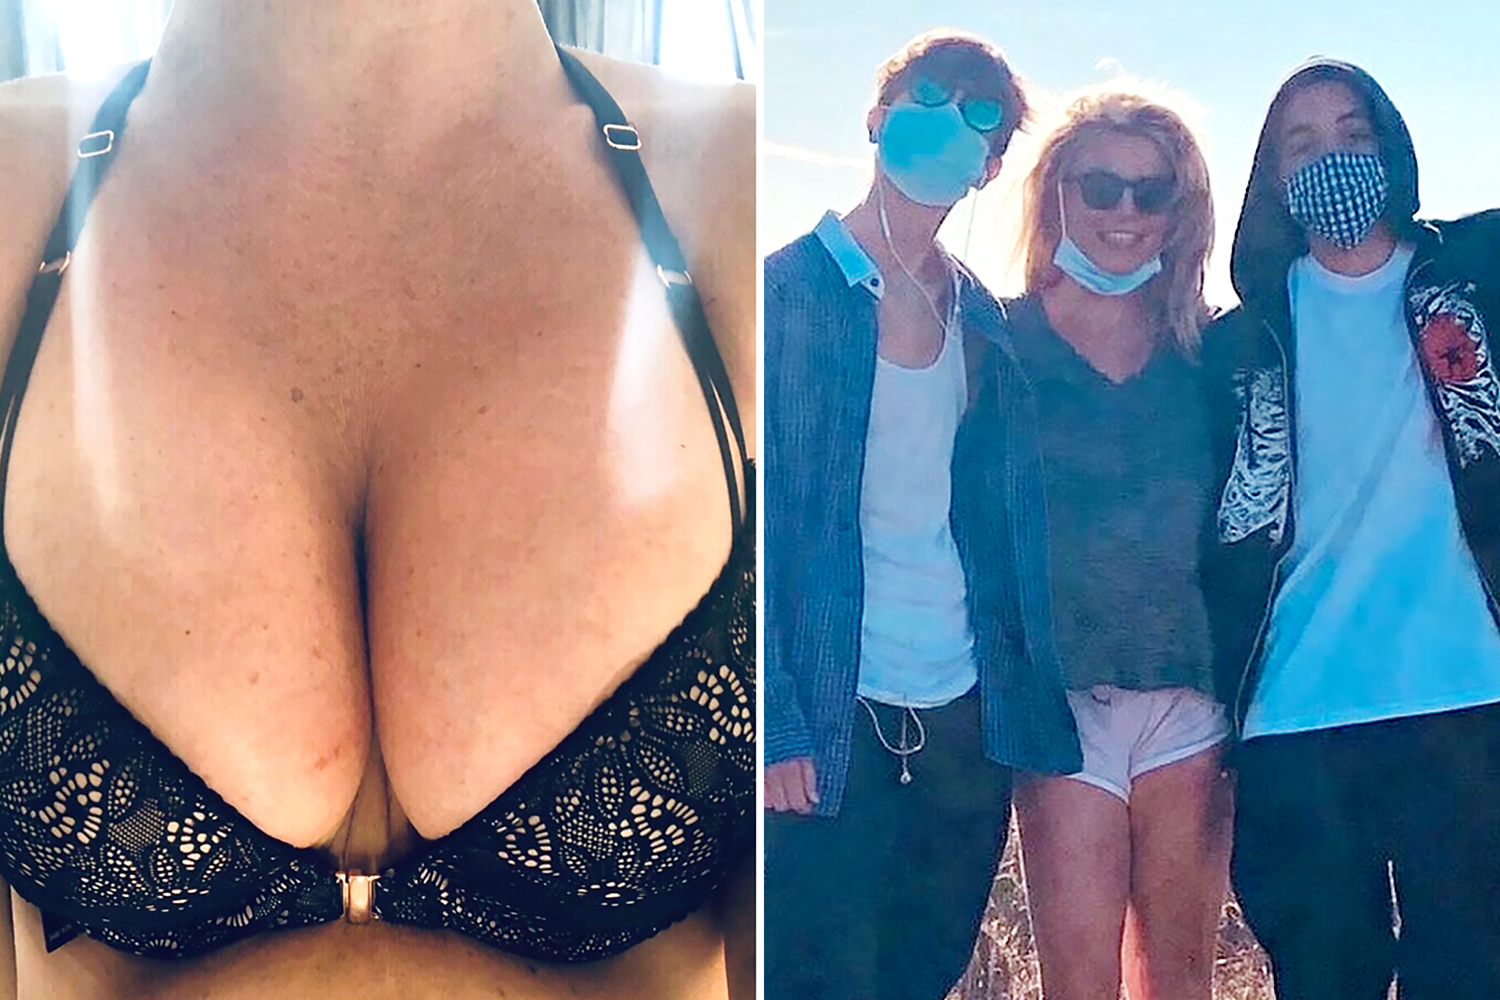 april keck recommends mom shows son boobs pic